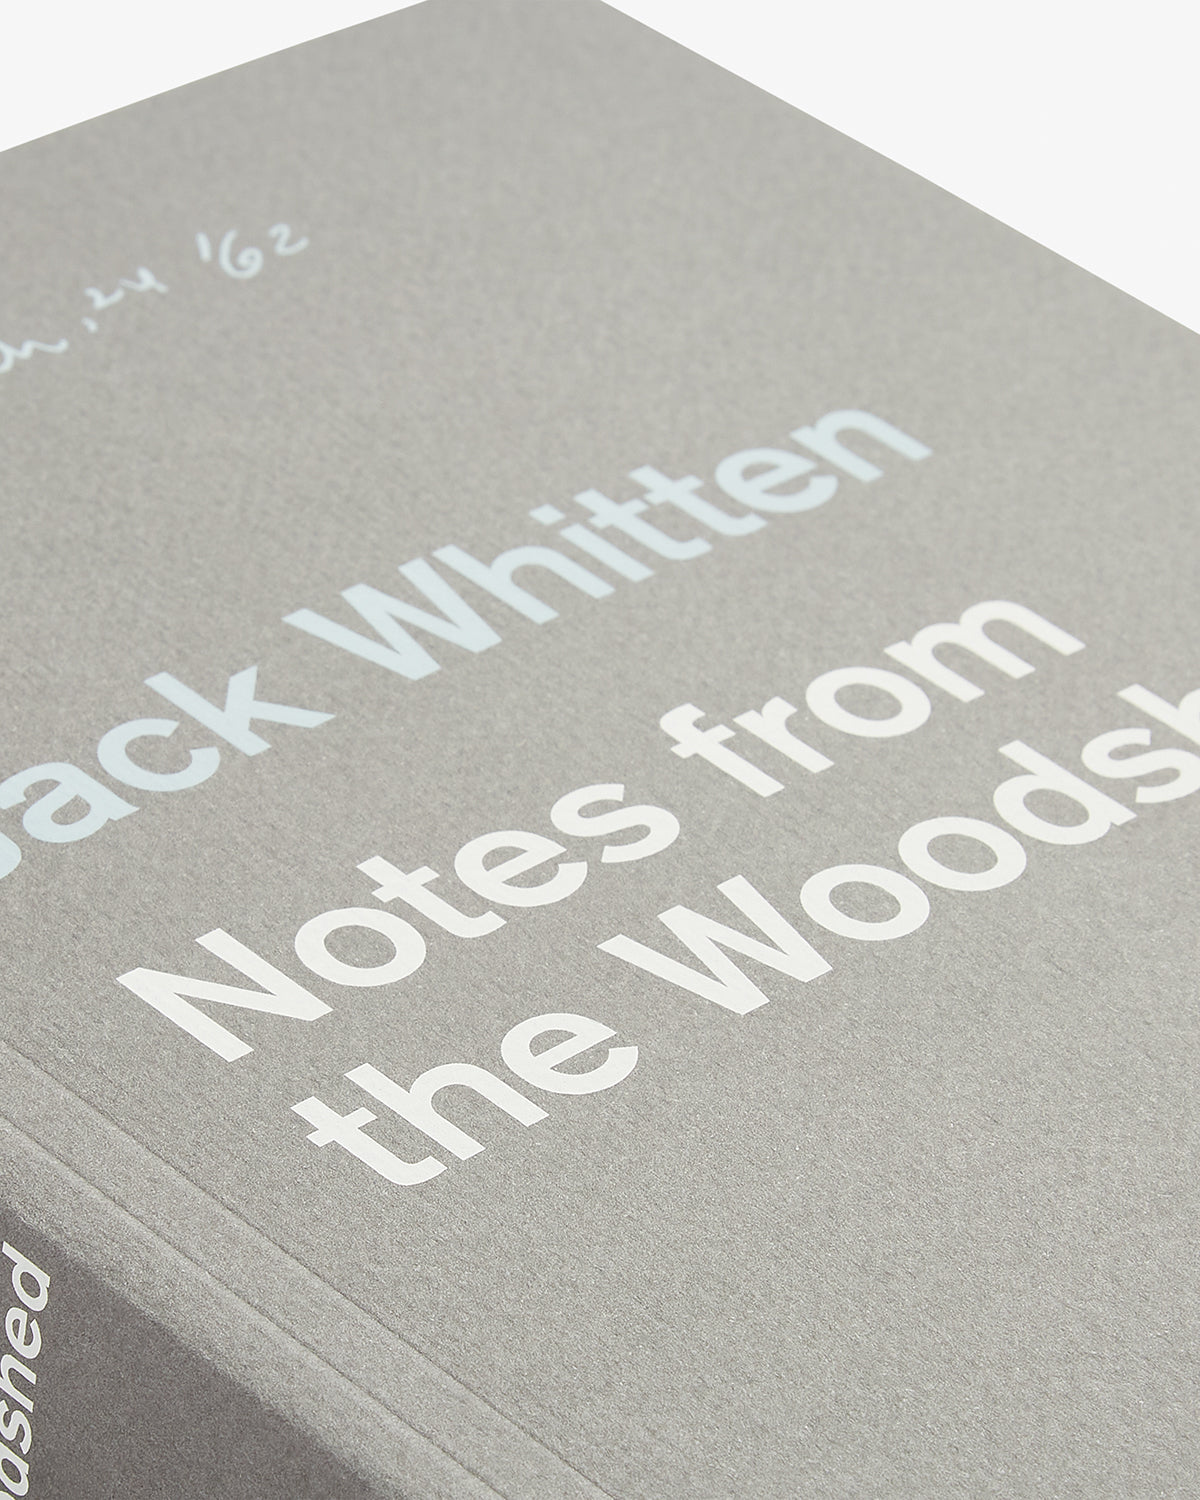 Jack Whitten: Notes from the Woodshed Default Title